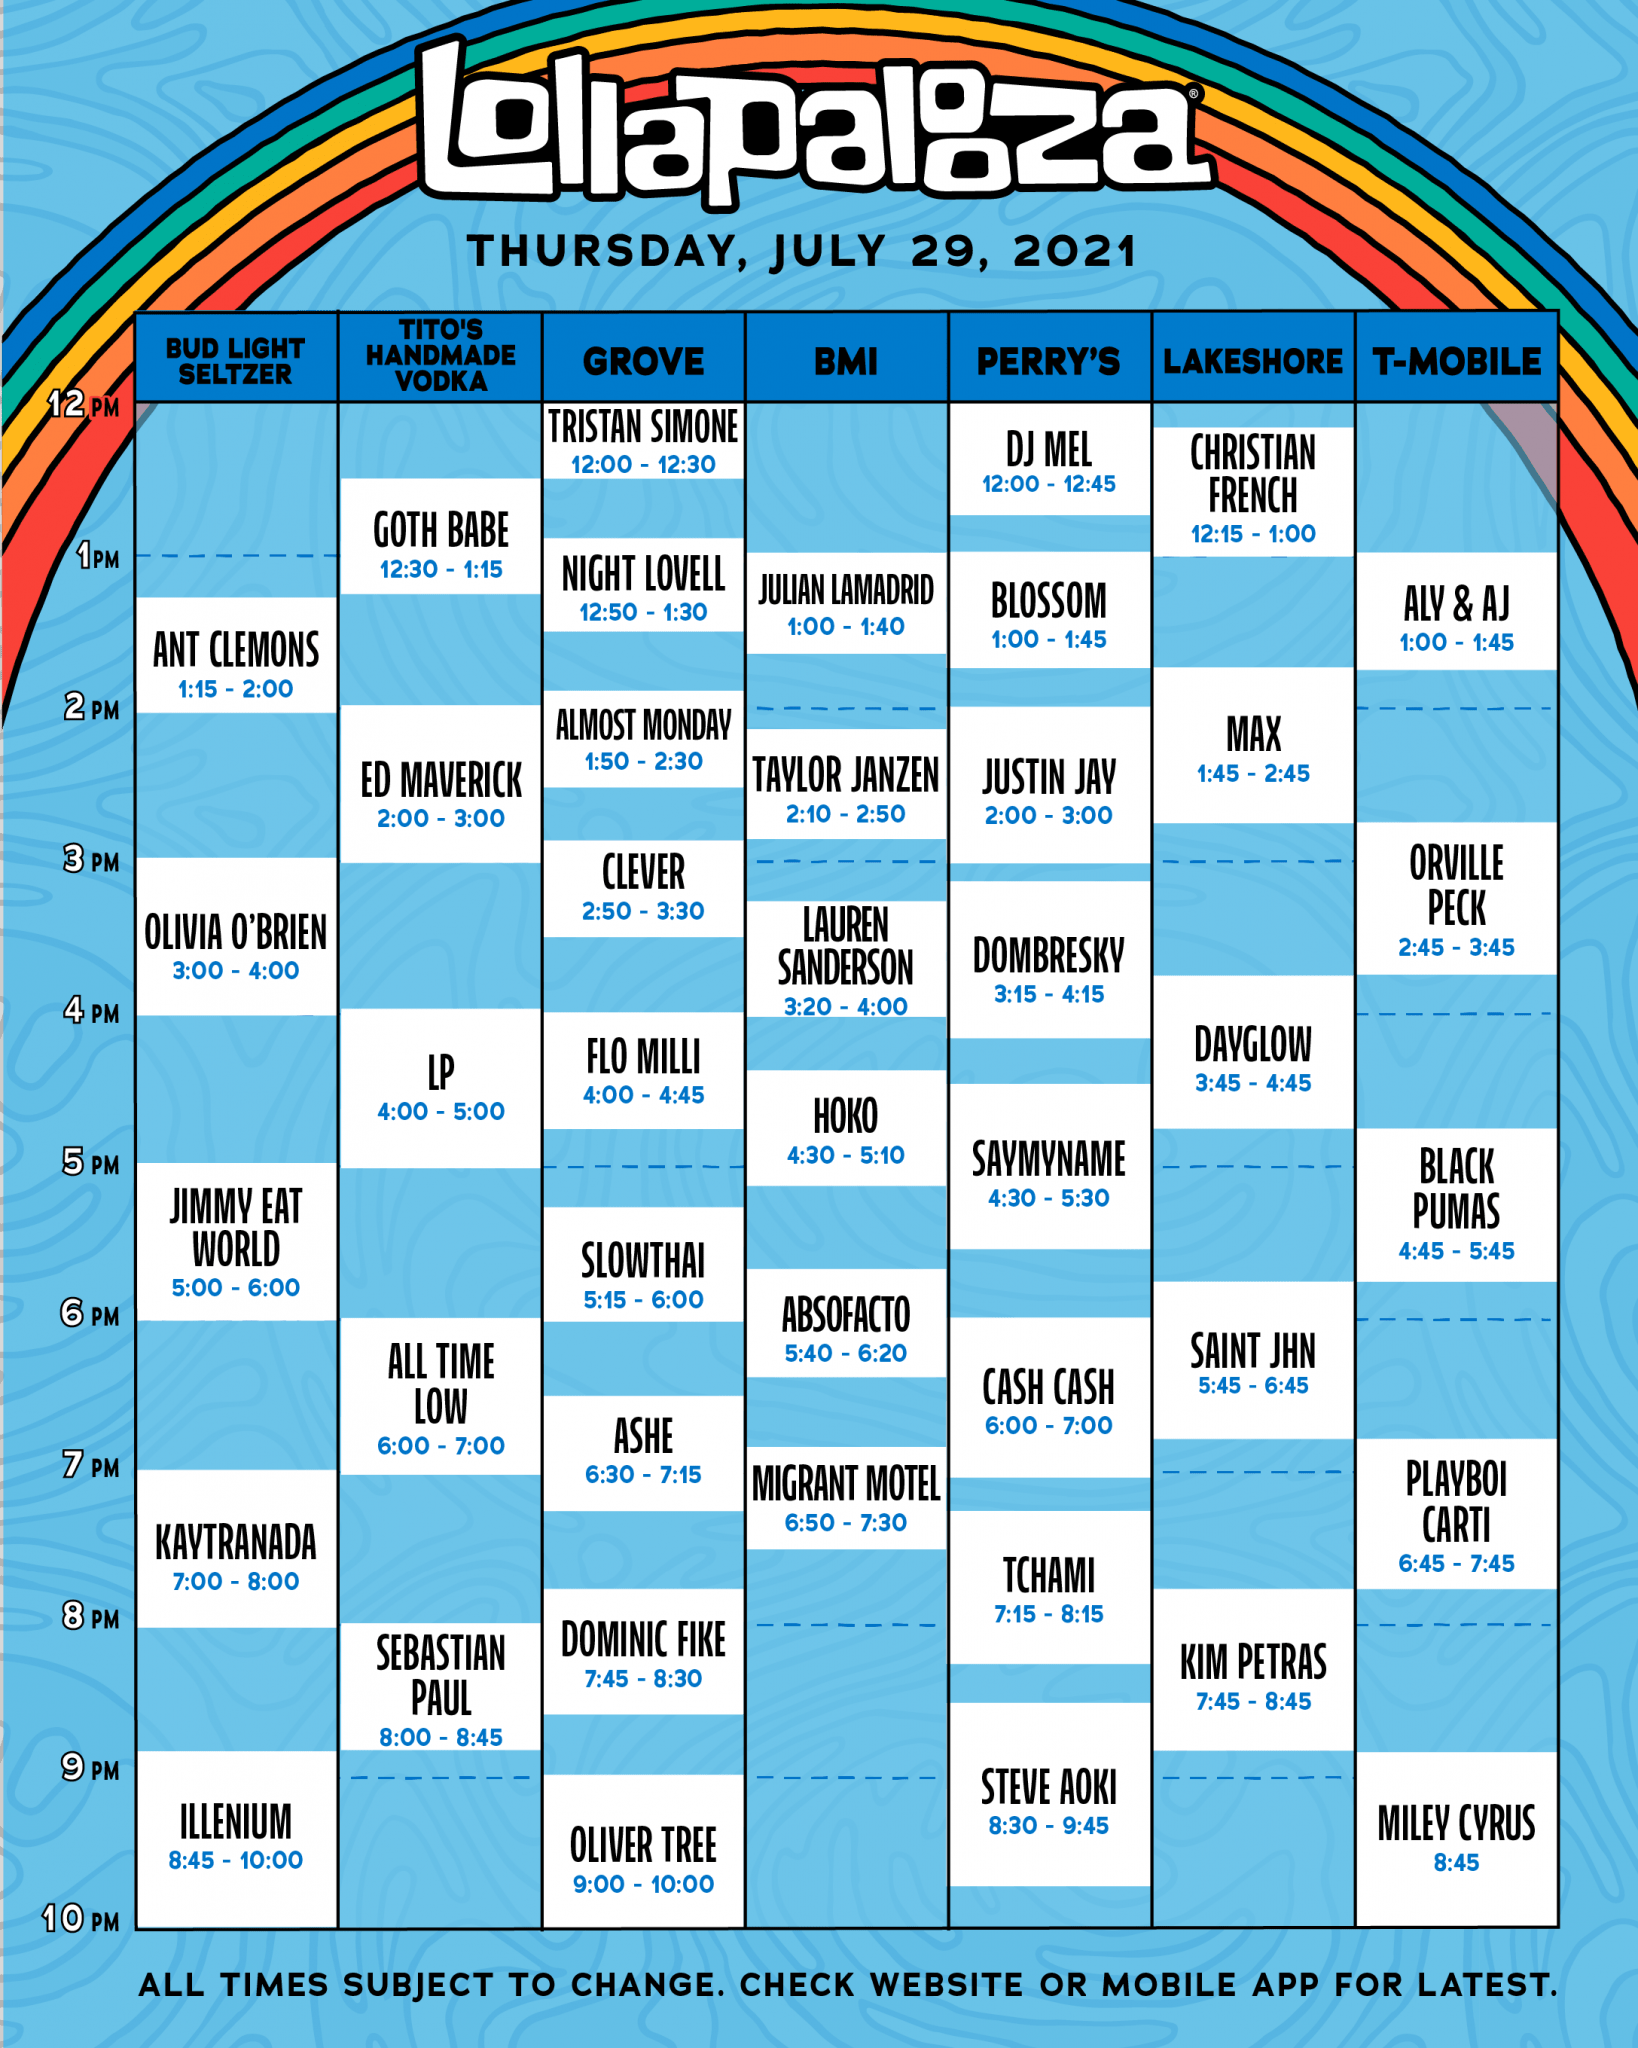 Lollapalooza Full 2021 Schedule Announced! - Chicago Music Guide